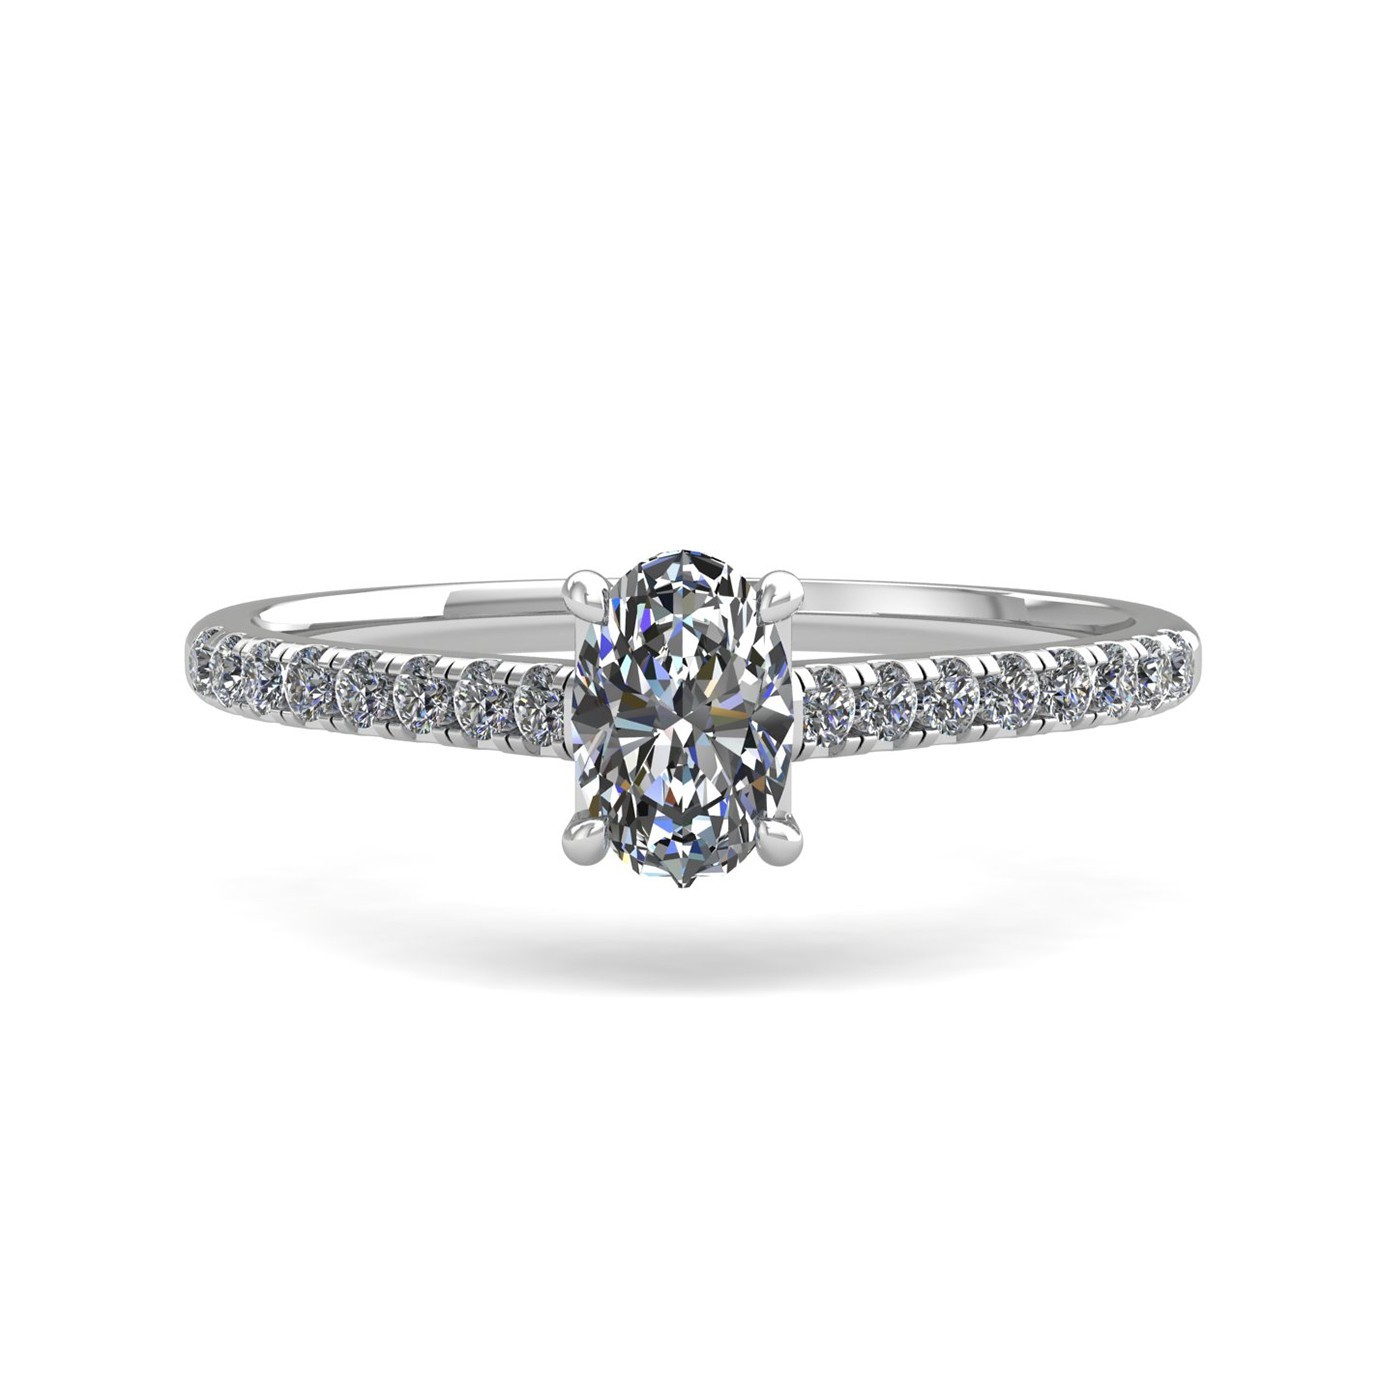 18K WHITE GOLD  0,30 CT 4 PRONGS OVAL CUT DIAMOND ENGAGEMENT RING WITH WHISPER THIN PAVÉ SET BAND